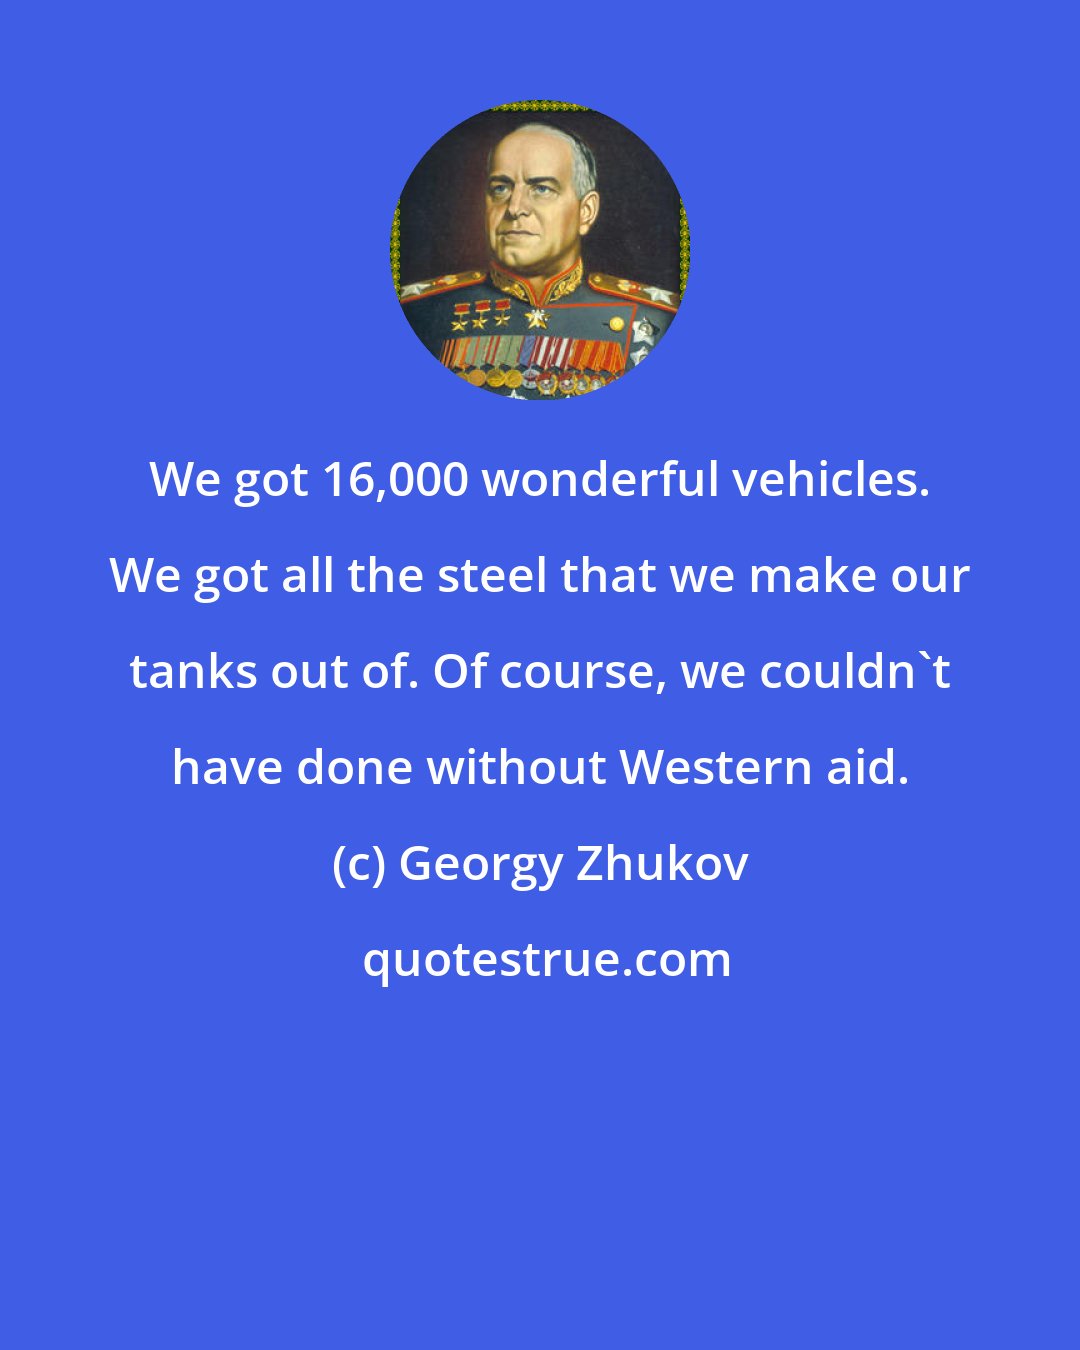 Georgy Zhukov: We got 16,000 wonderful vehicles. We got all the steel that we make our tanks out of. Of course, we couldn't have done without Western aid.